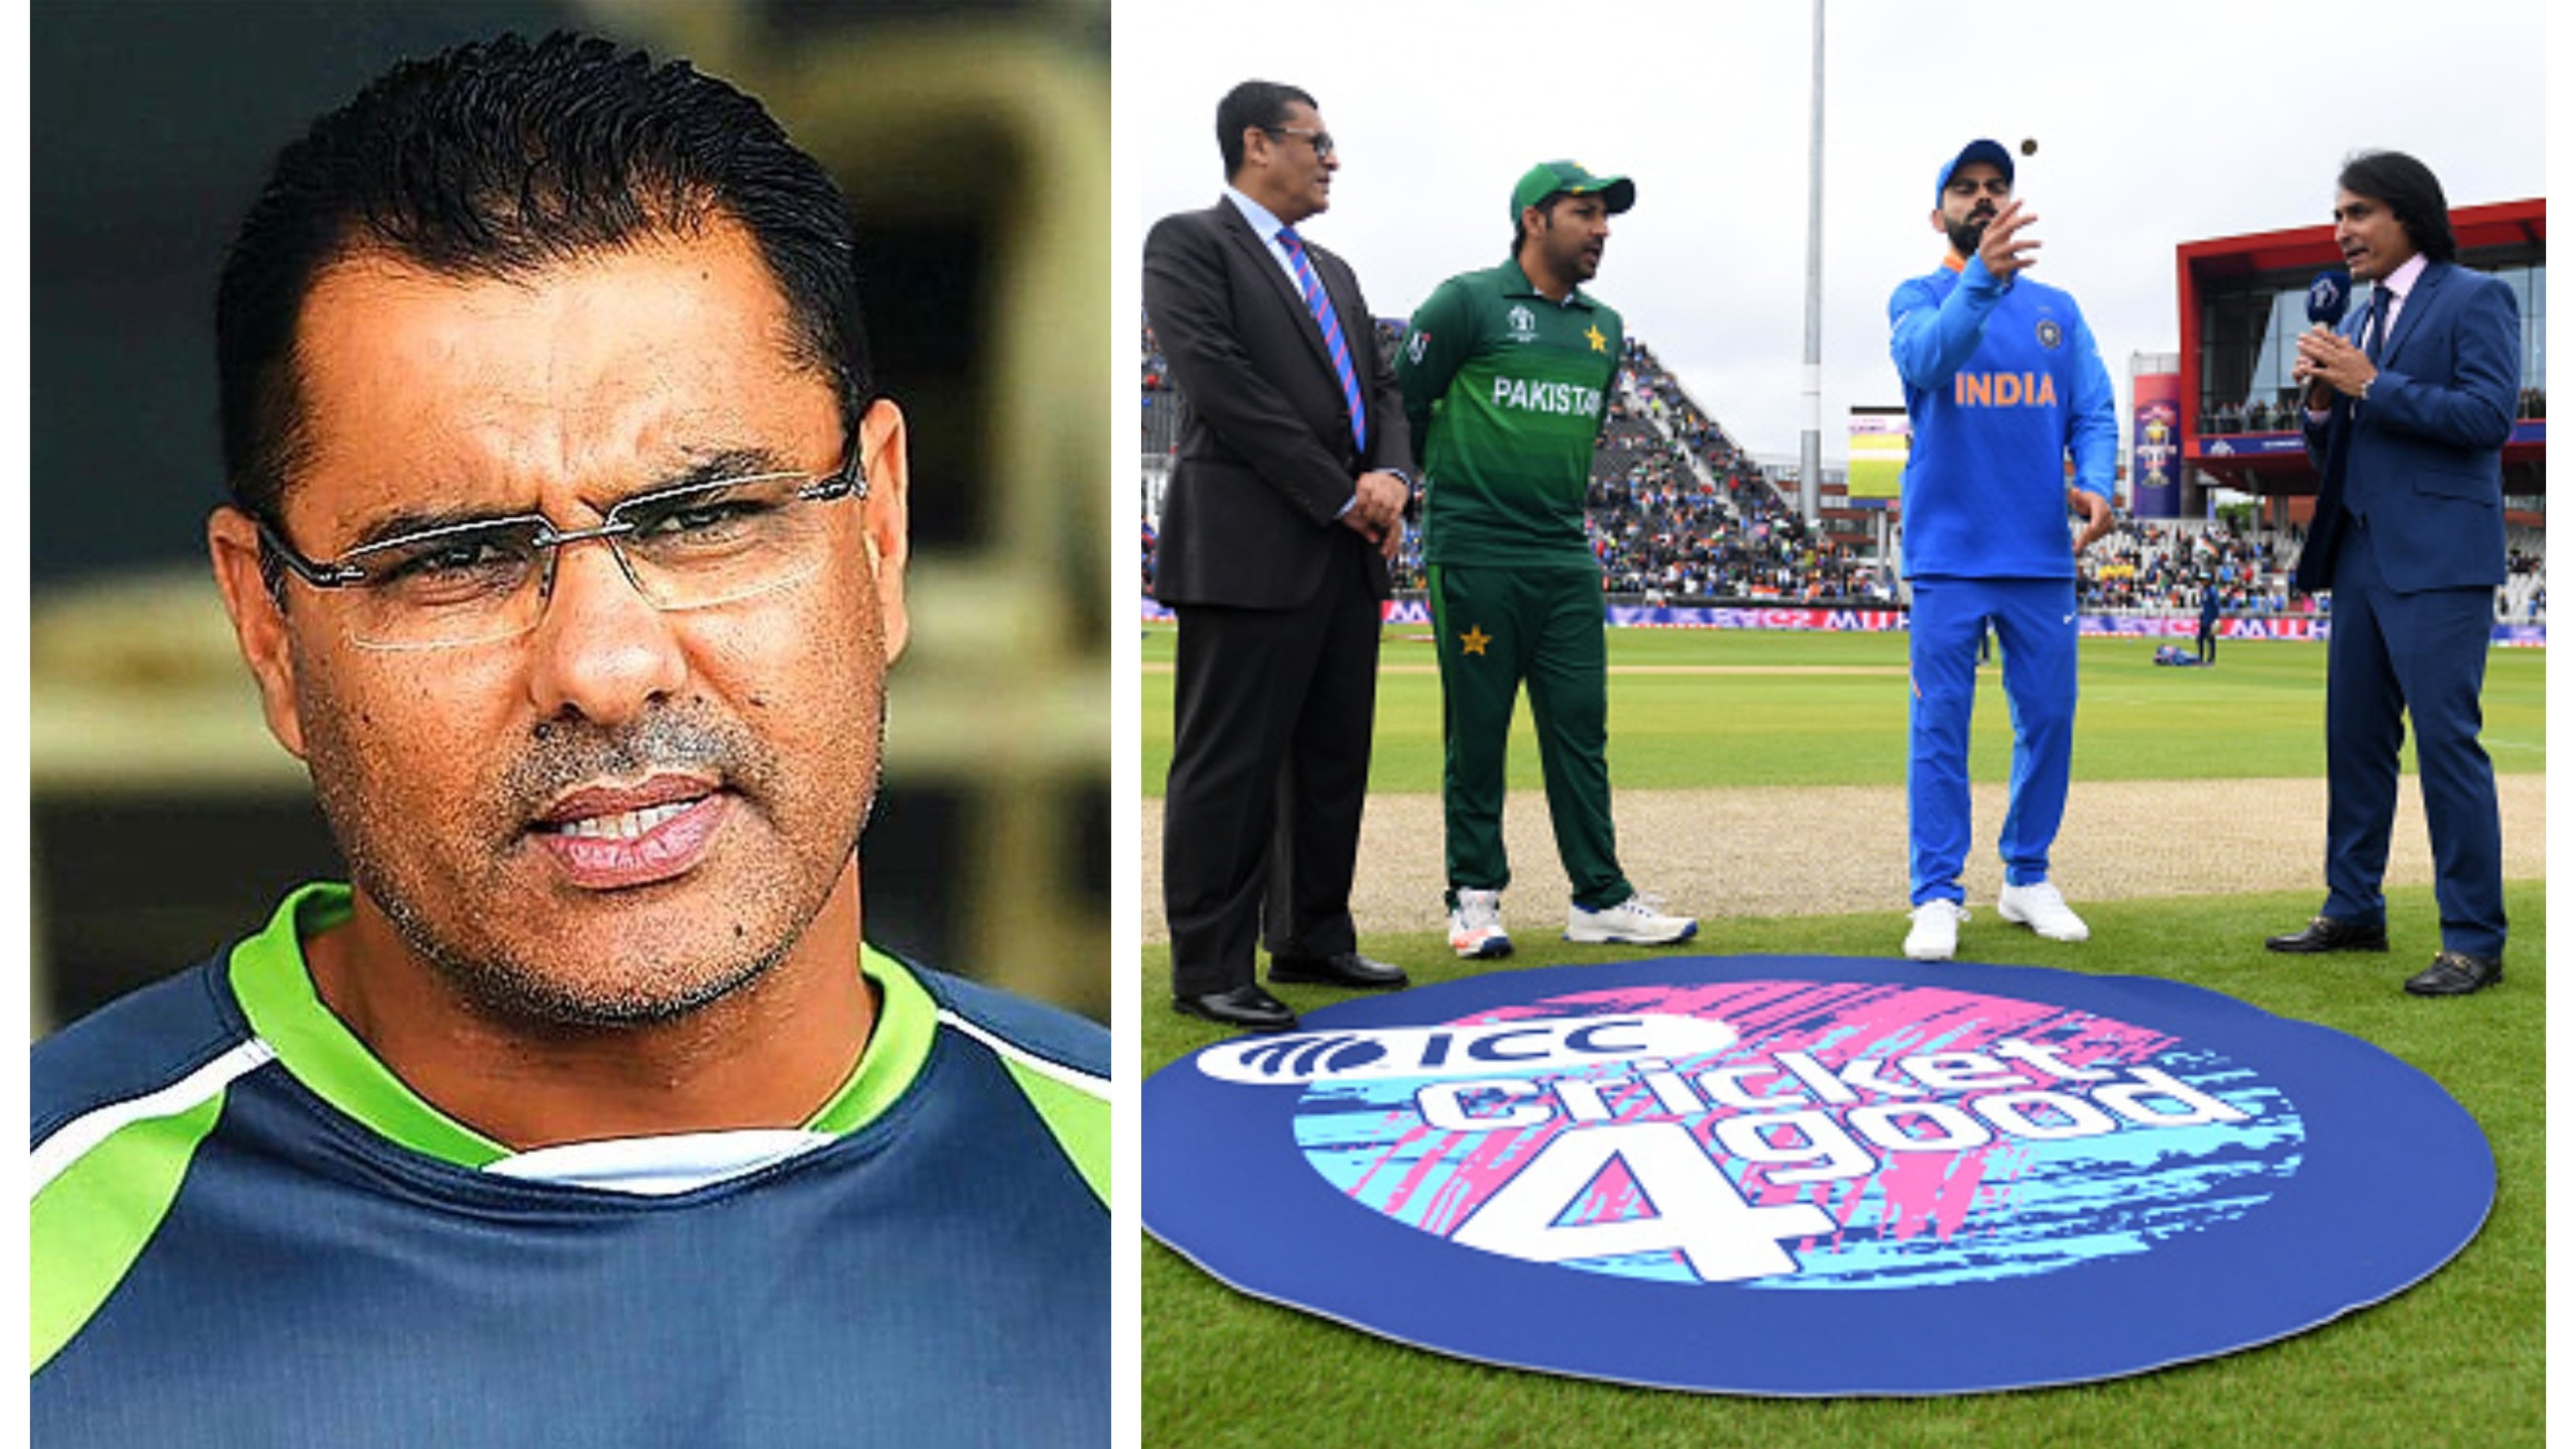 ‘Pakistan got it wrong against India right from toss’, Waqar Younis recalls Indo-Pak World Cup 2019 game